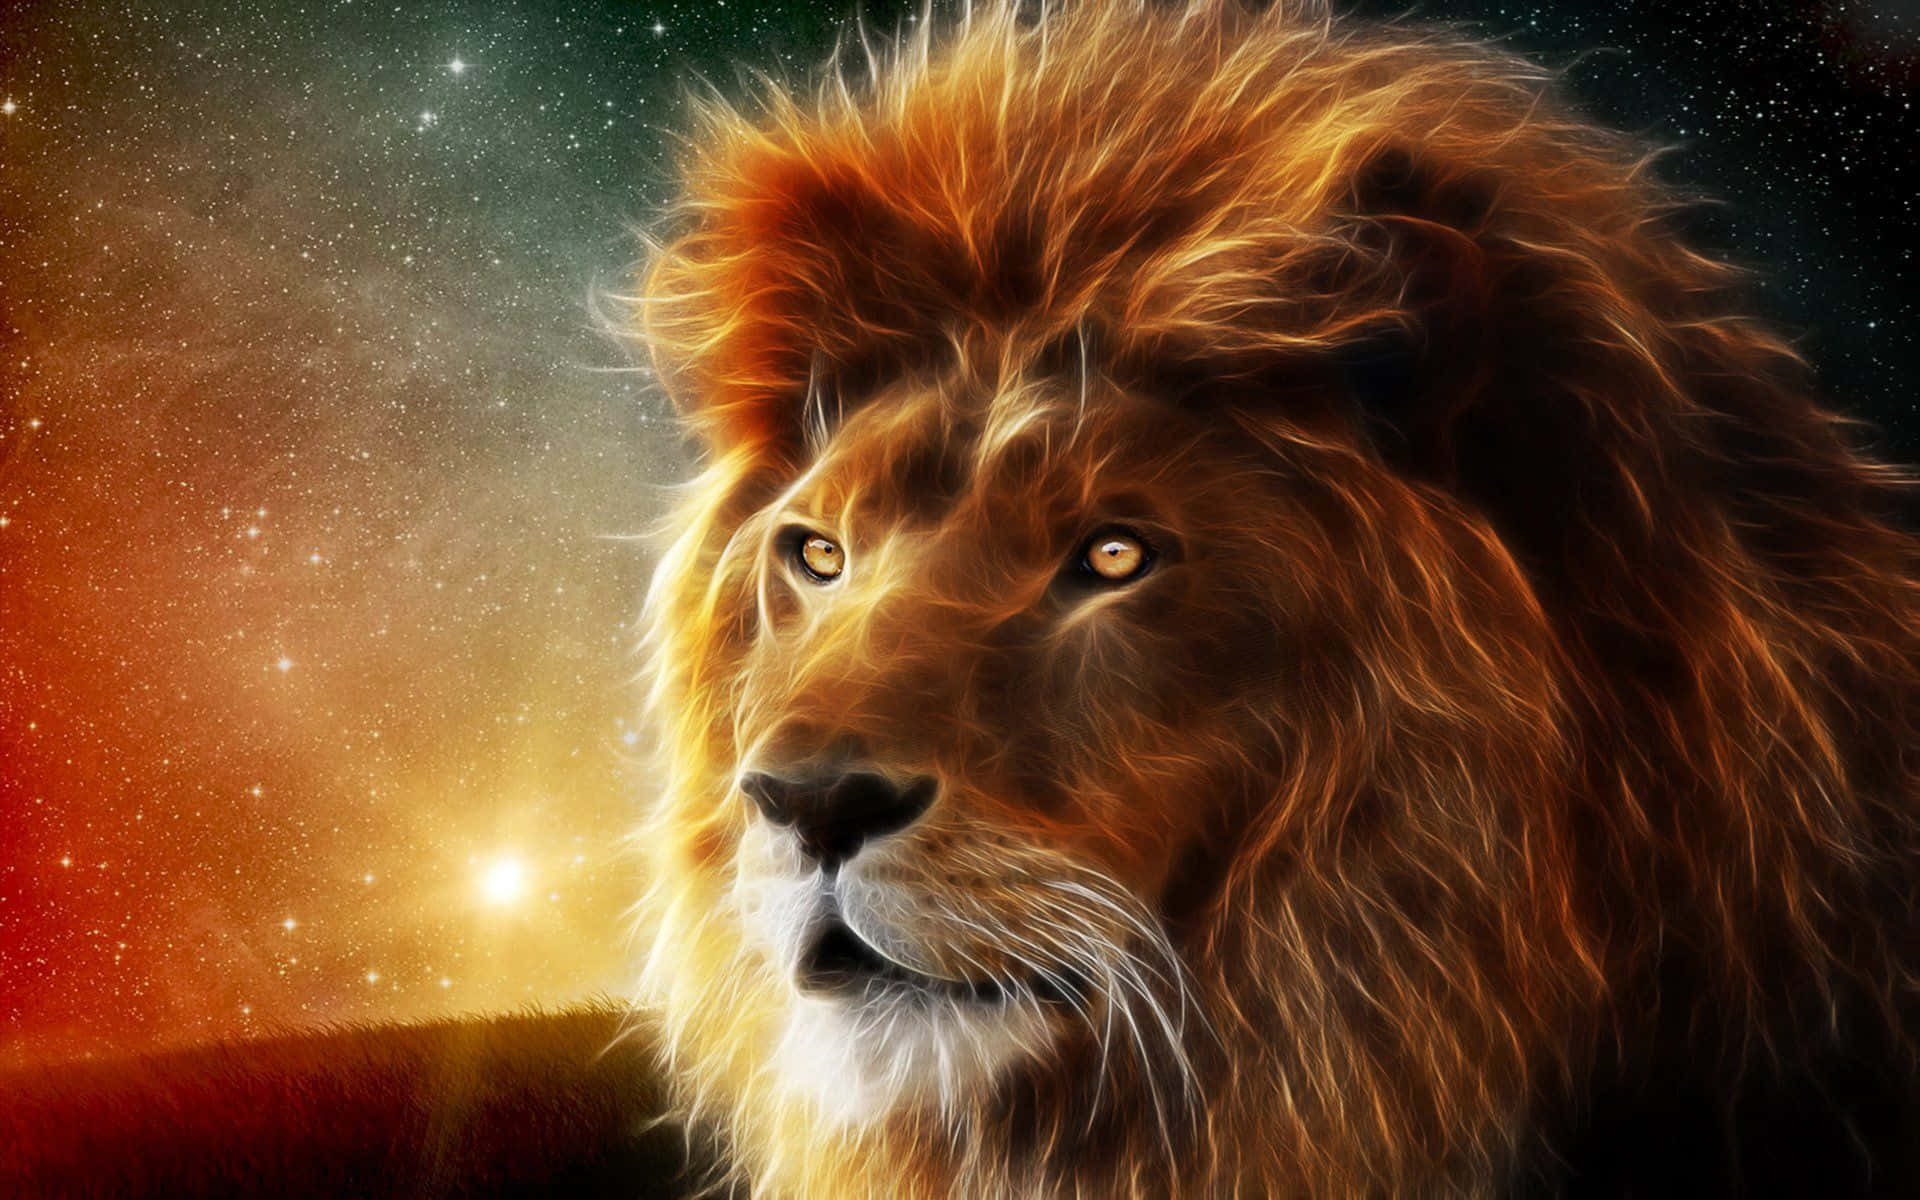 "Abstract Lion Roaring in Artistic Colors" Wallpaper